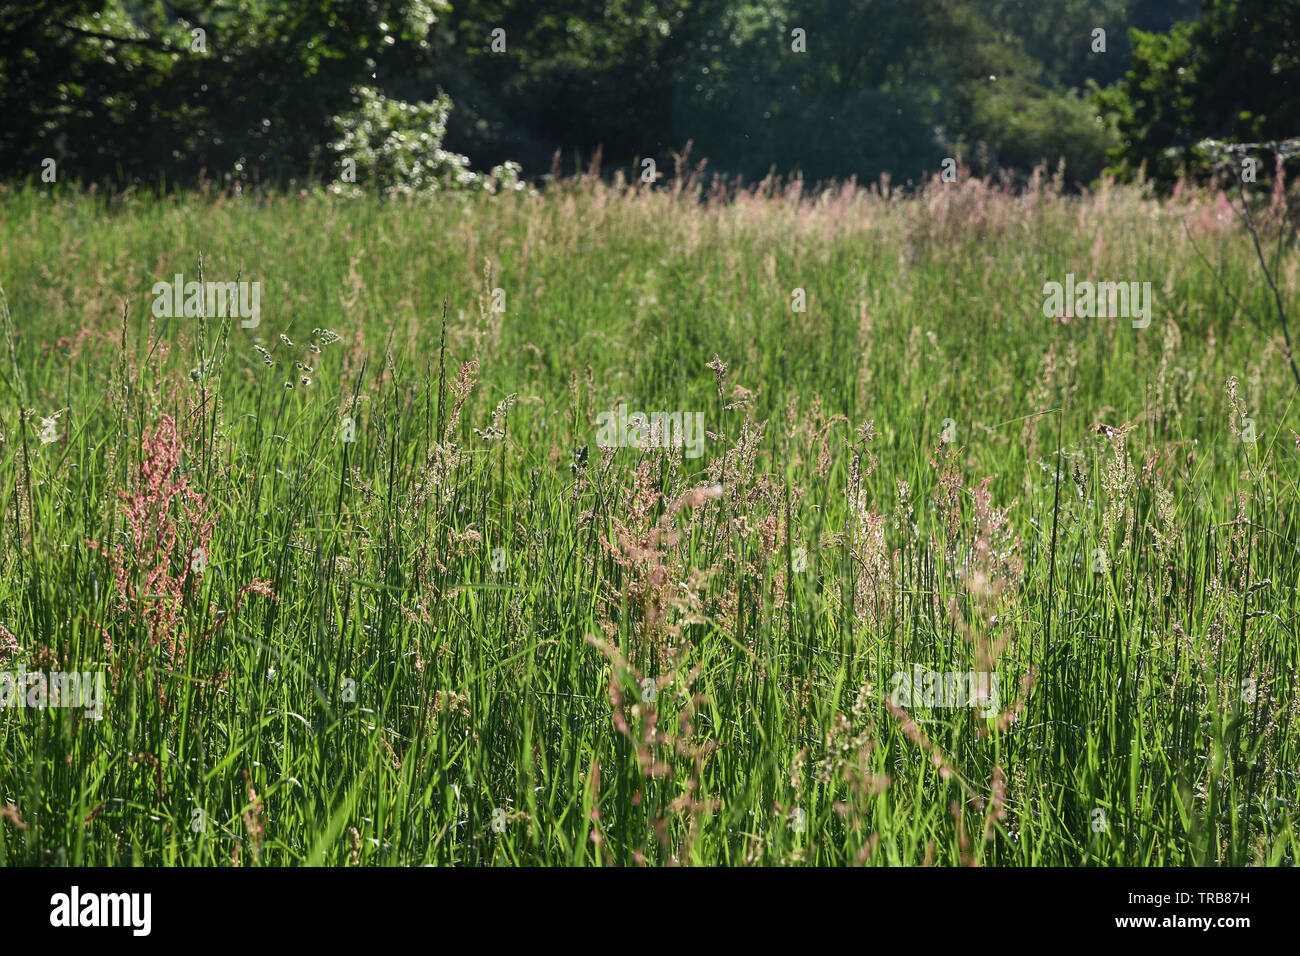 Herbe longue, Foots Cray Meadows, Sidcup, Kent. ROYAUME-UNI Banque D'Images